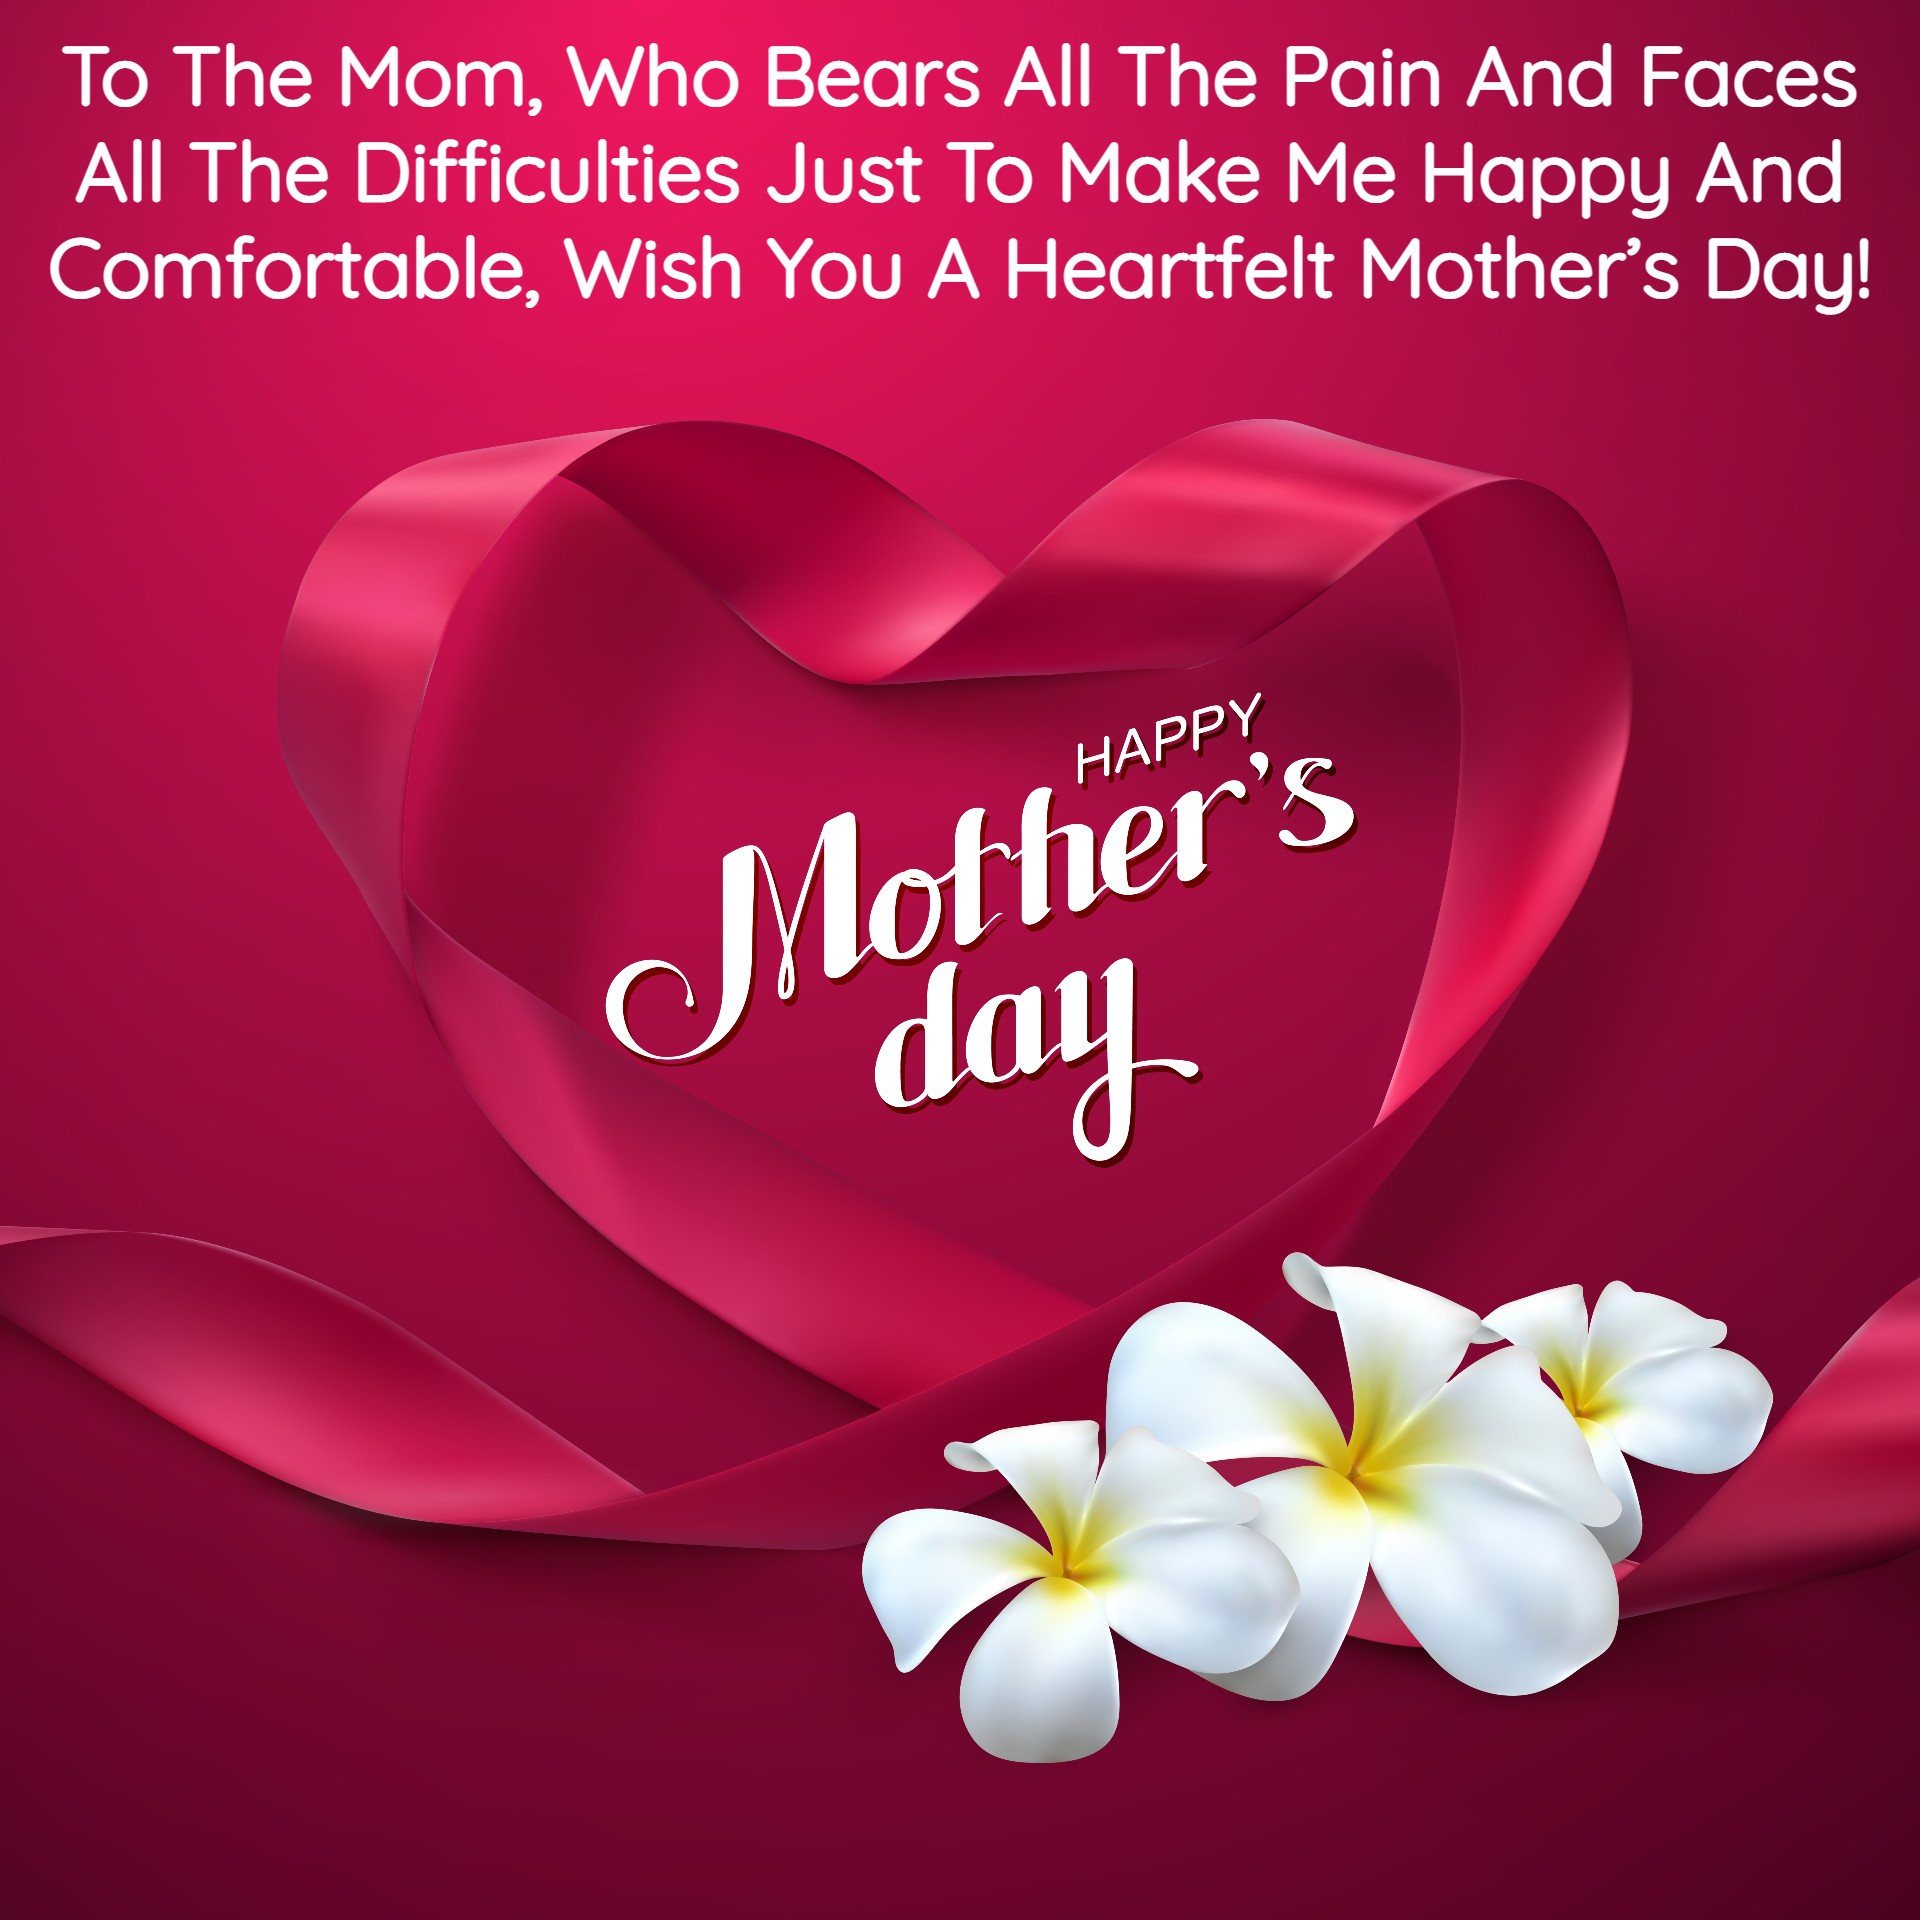 Happy Mother's Day, When is Mother's Day?